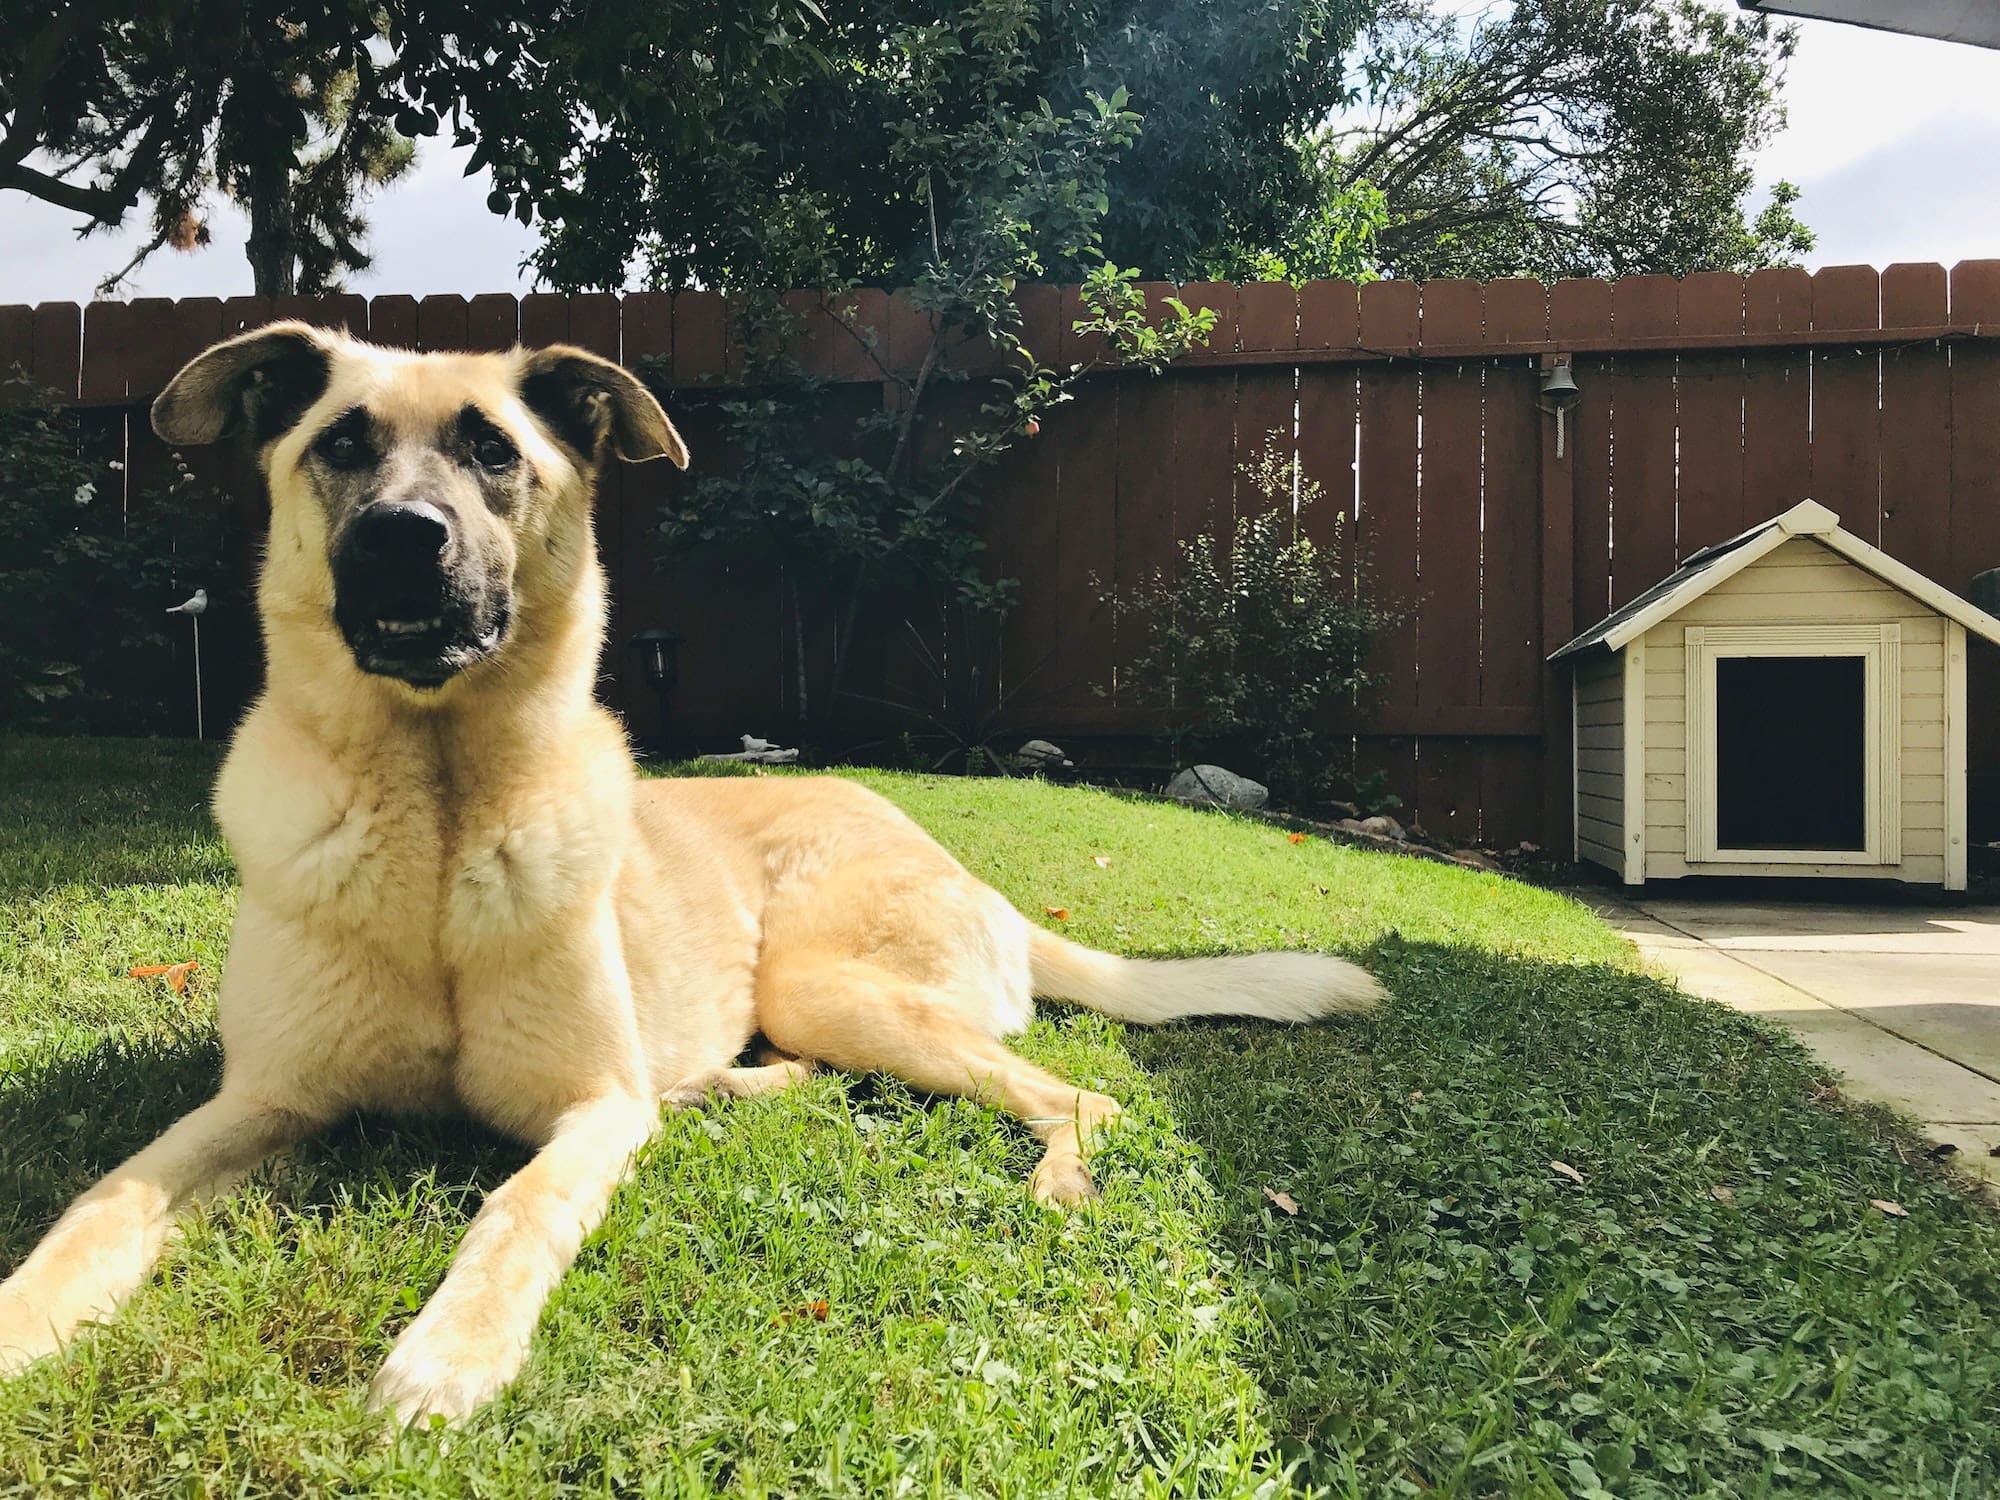 NOMINATED - A beautiful pup in her yard enjoying the cool grass and the warm sun with her dog house